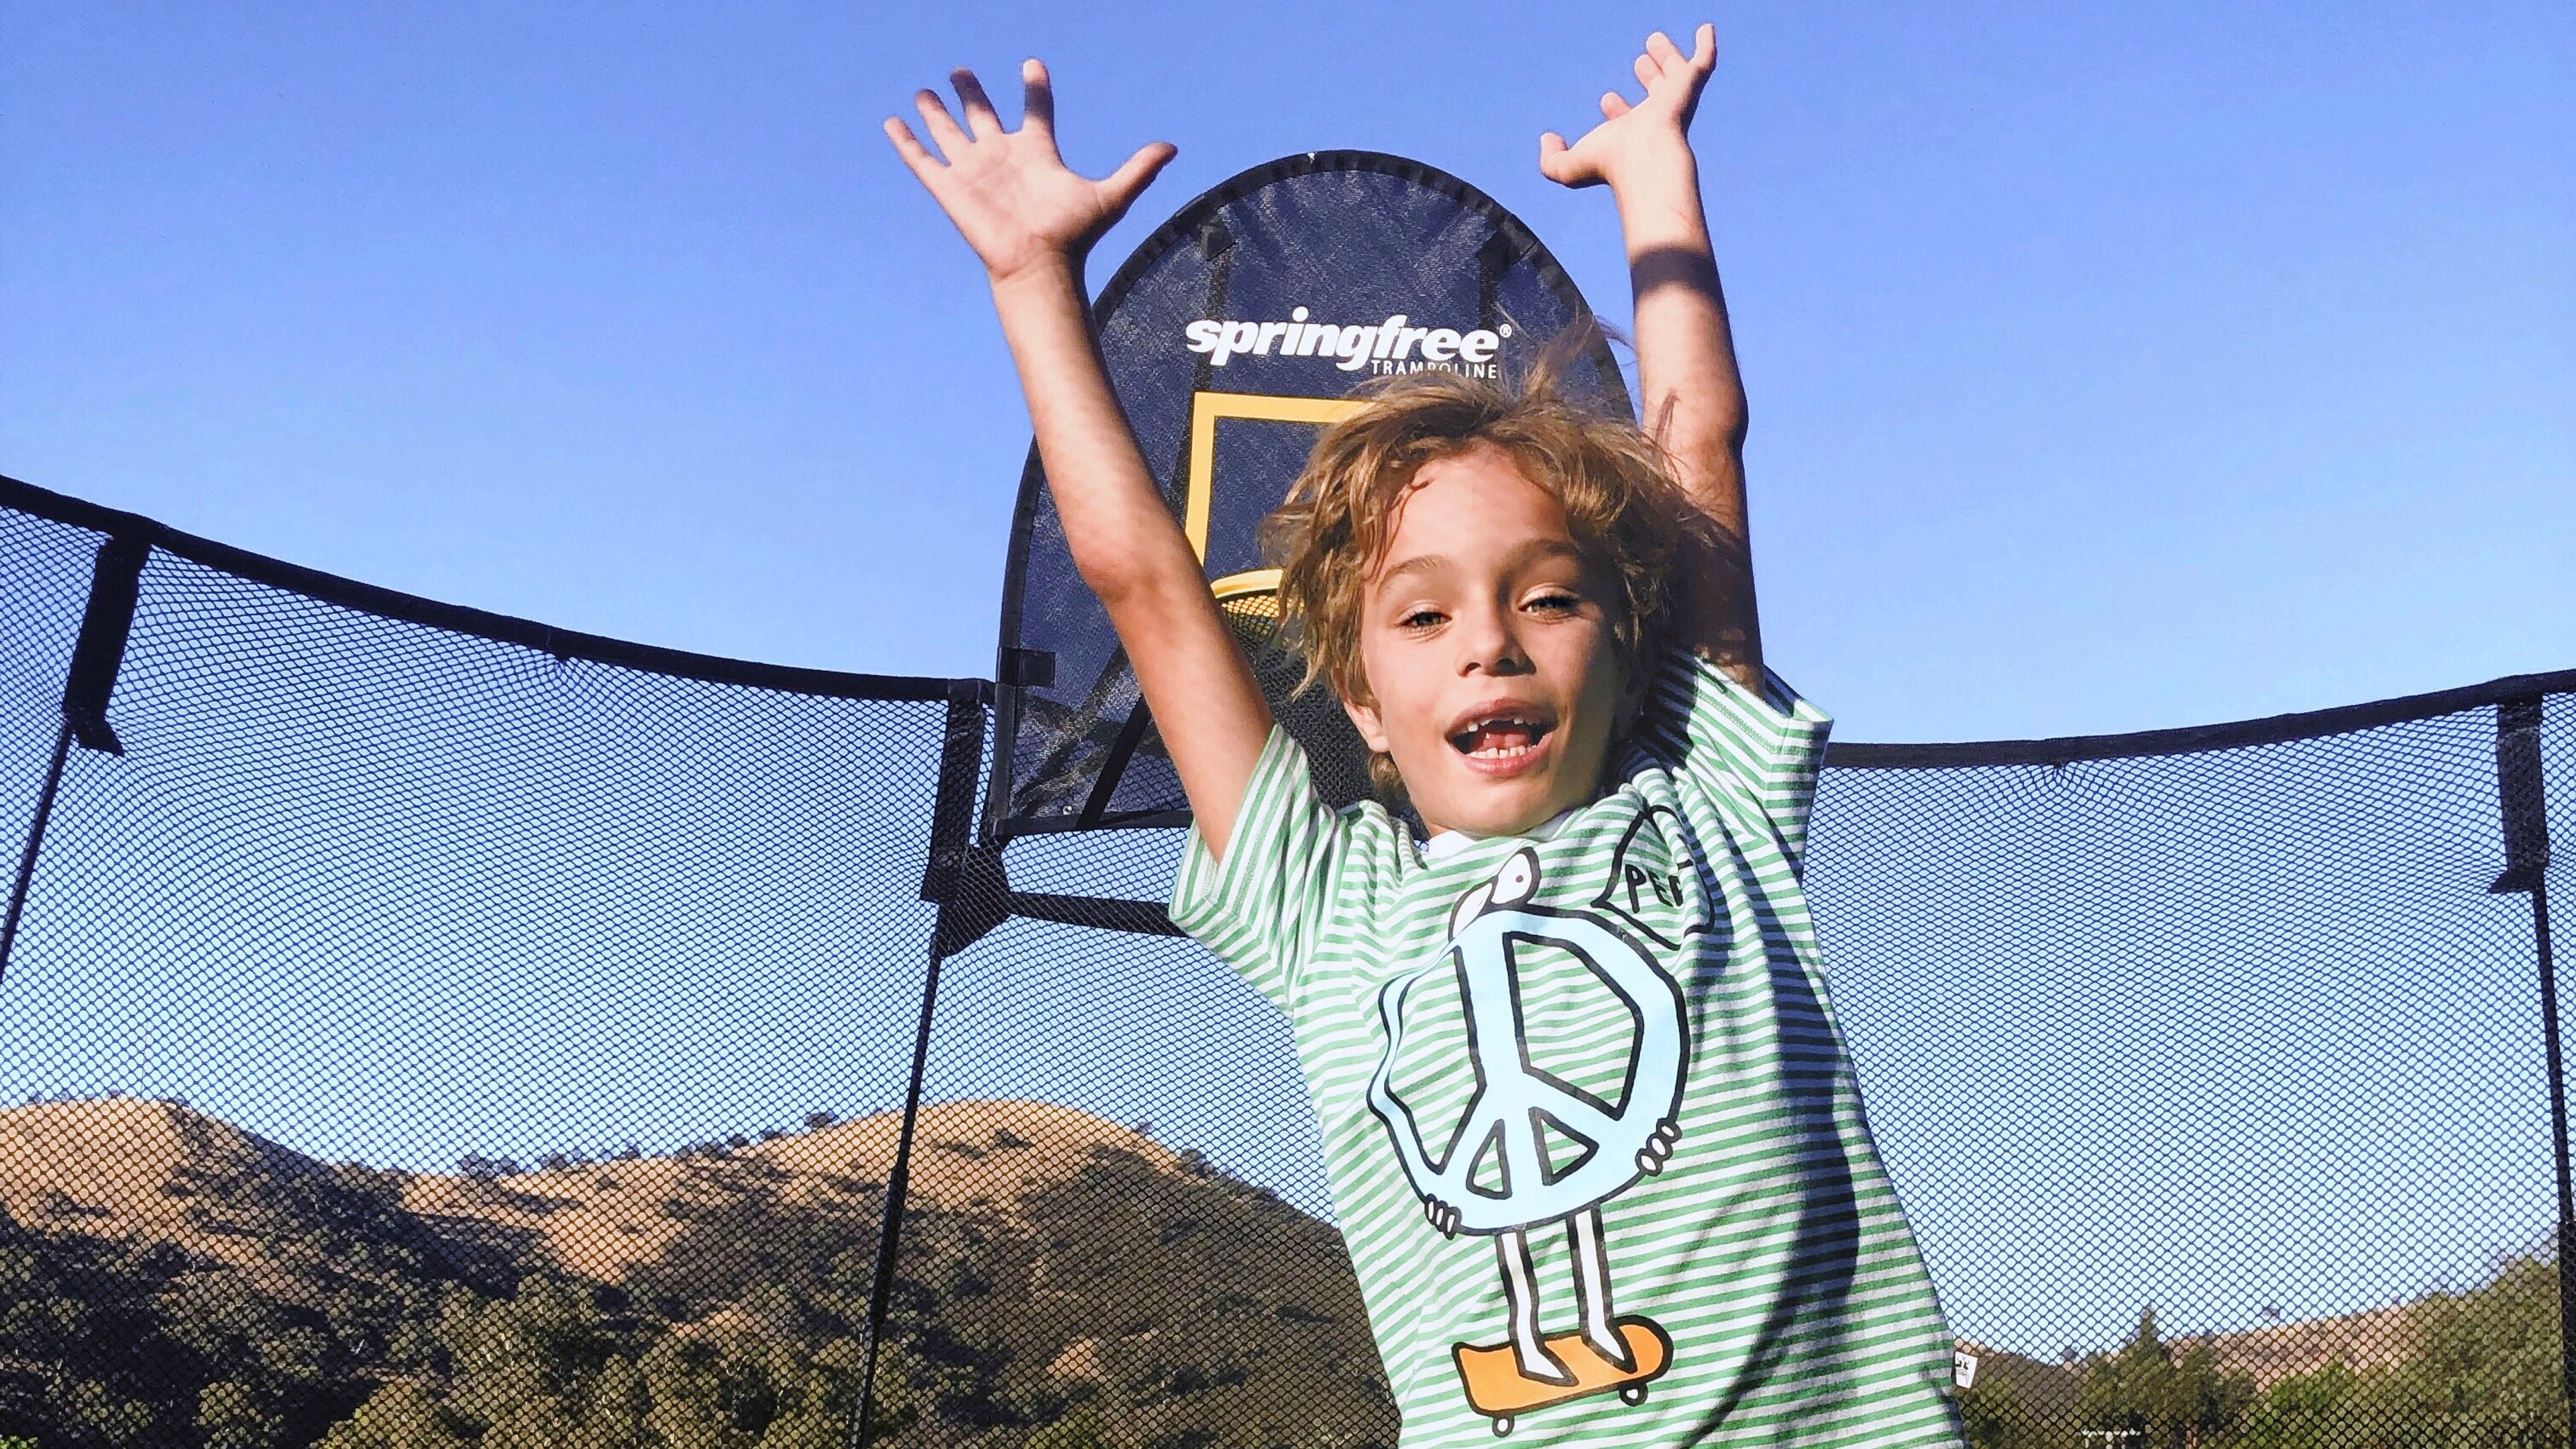 Trampoline Benefits for Kids with Additional Needs